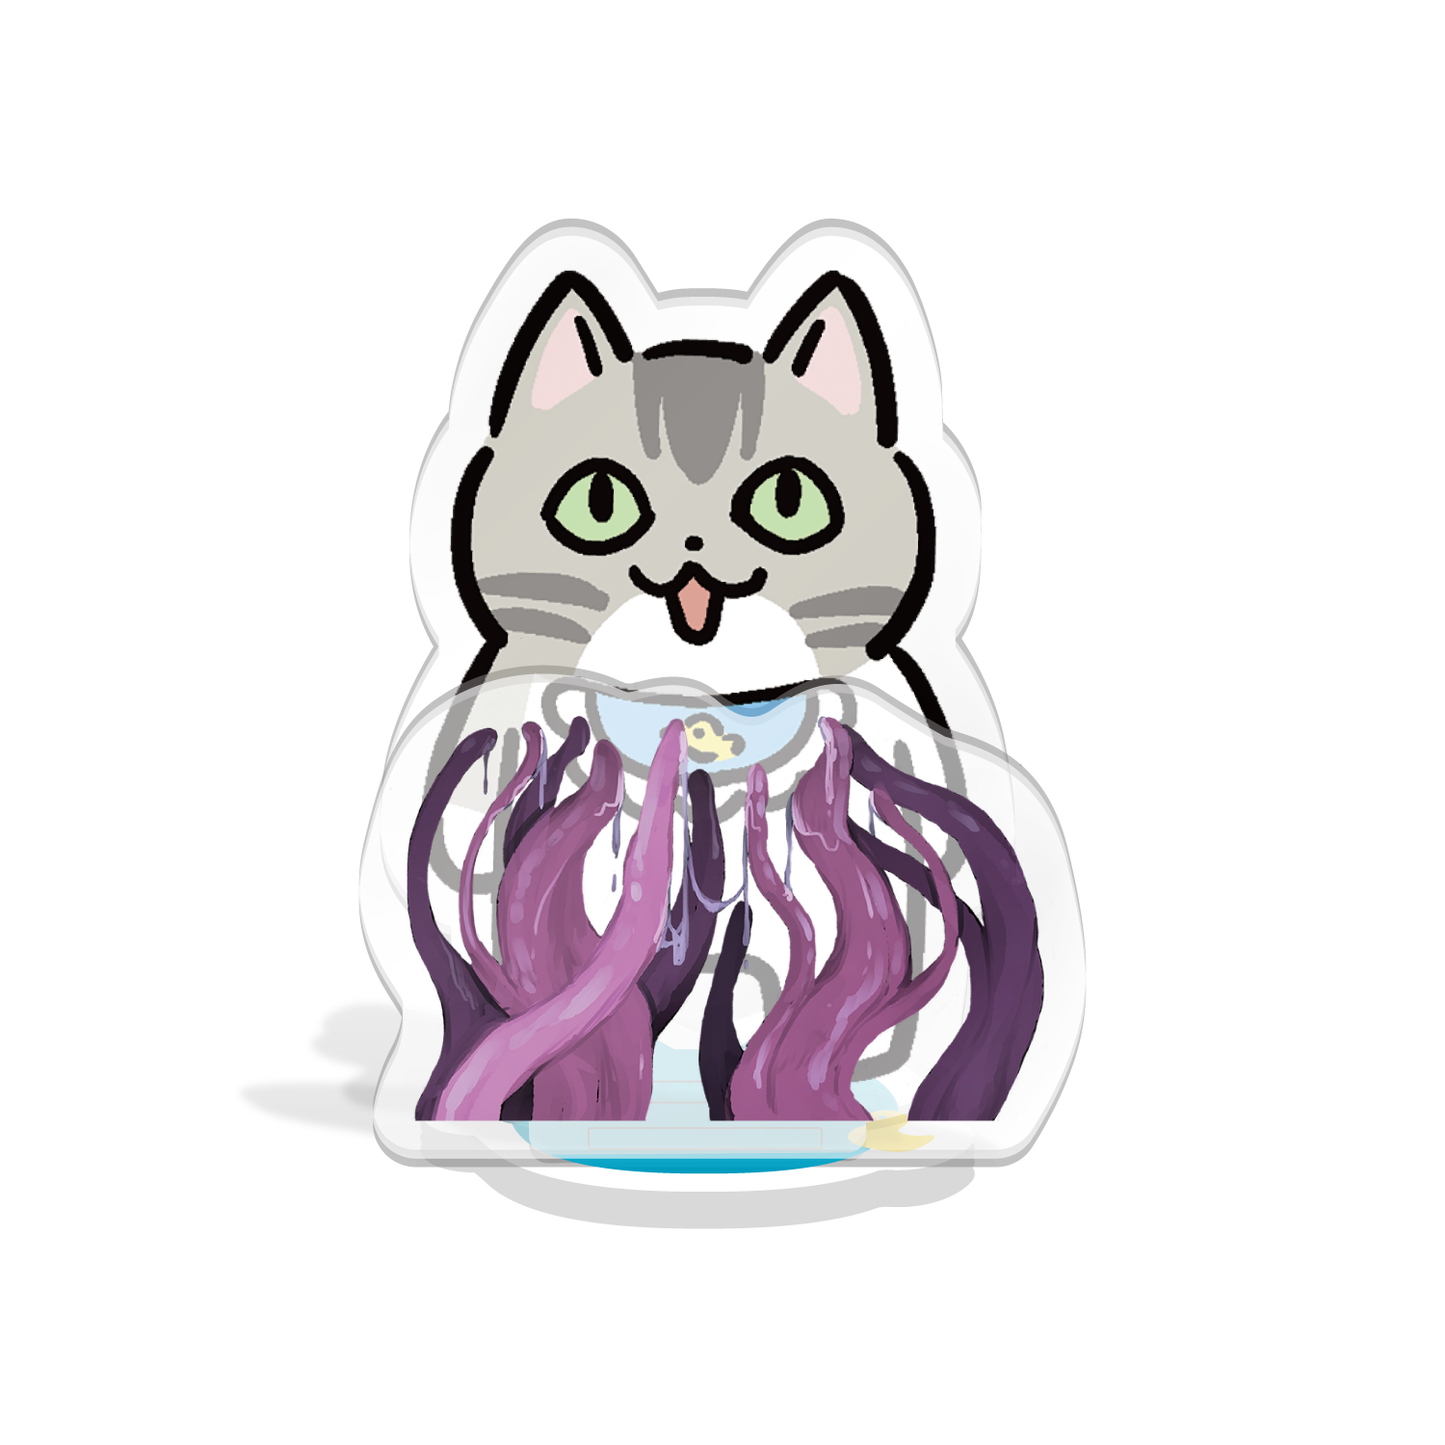 Nyan Crafted Acrylic Stand (Tentacle Play Set)